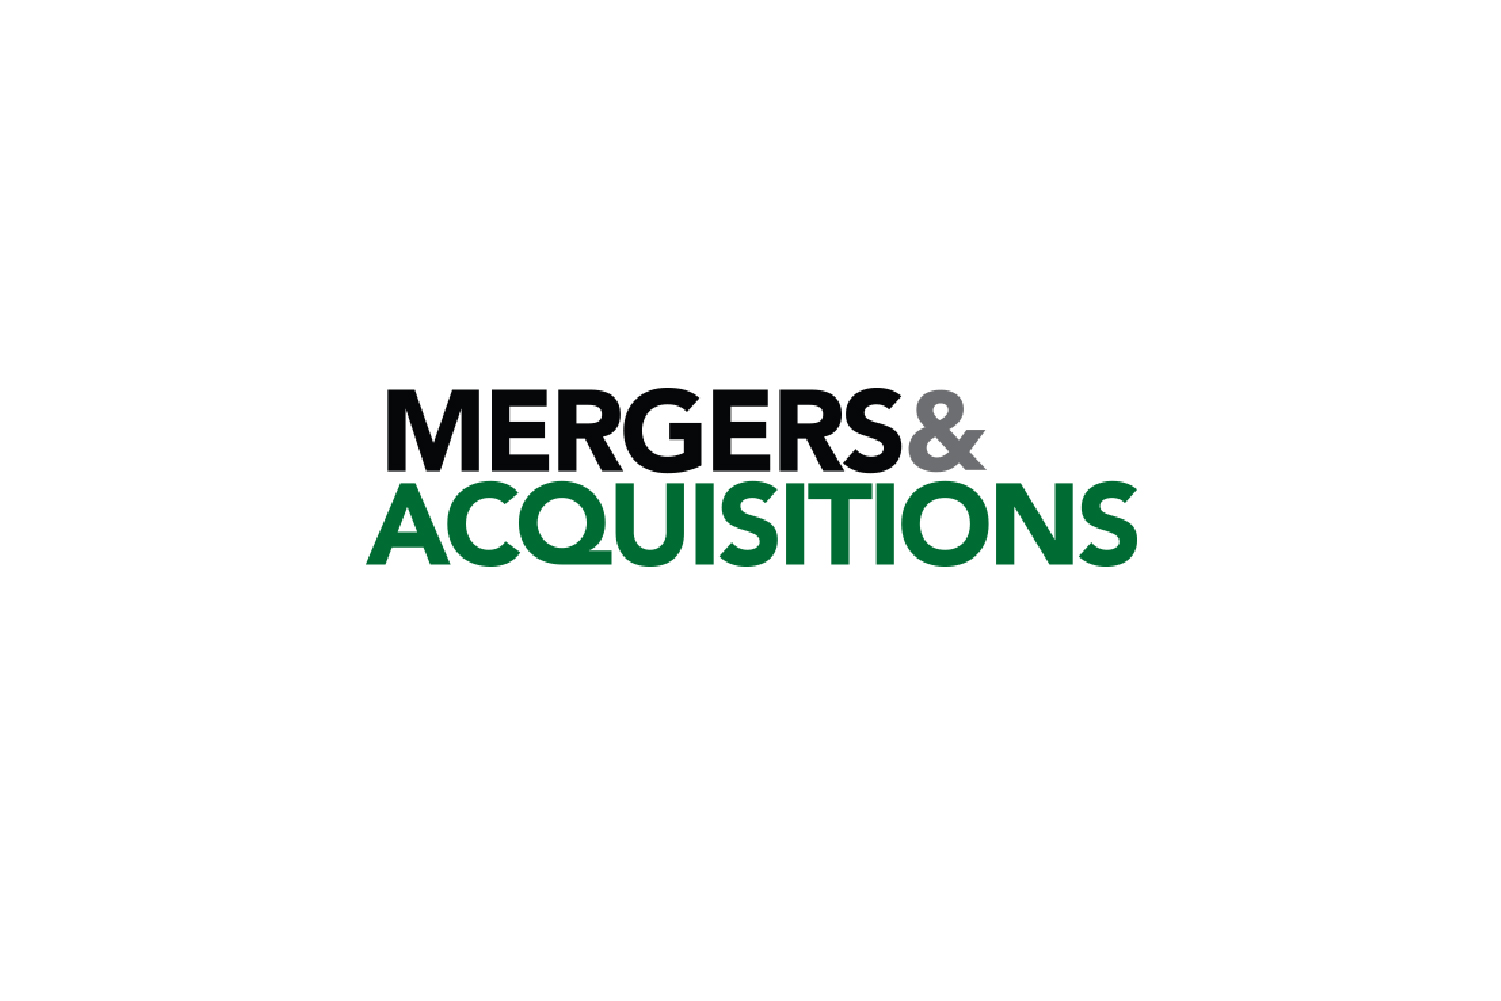 Mergers and acquisitions middle market